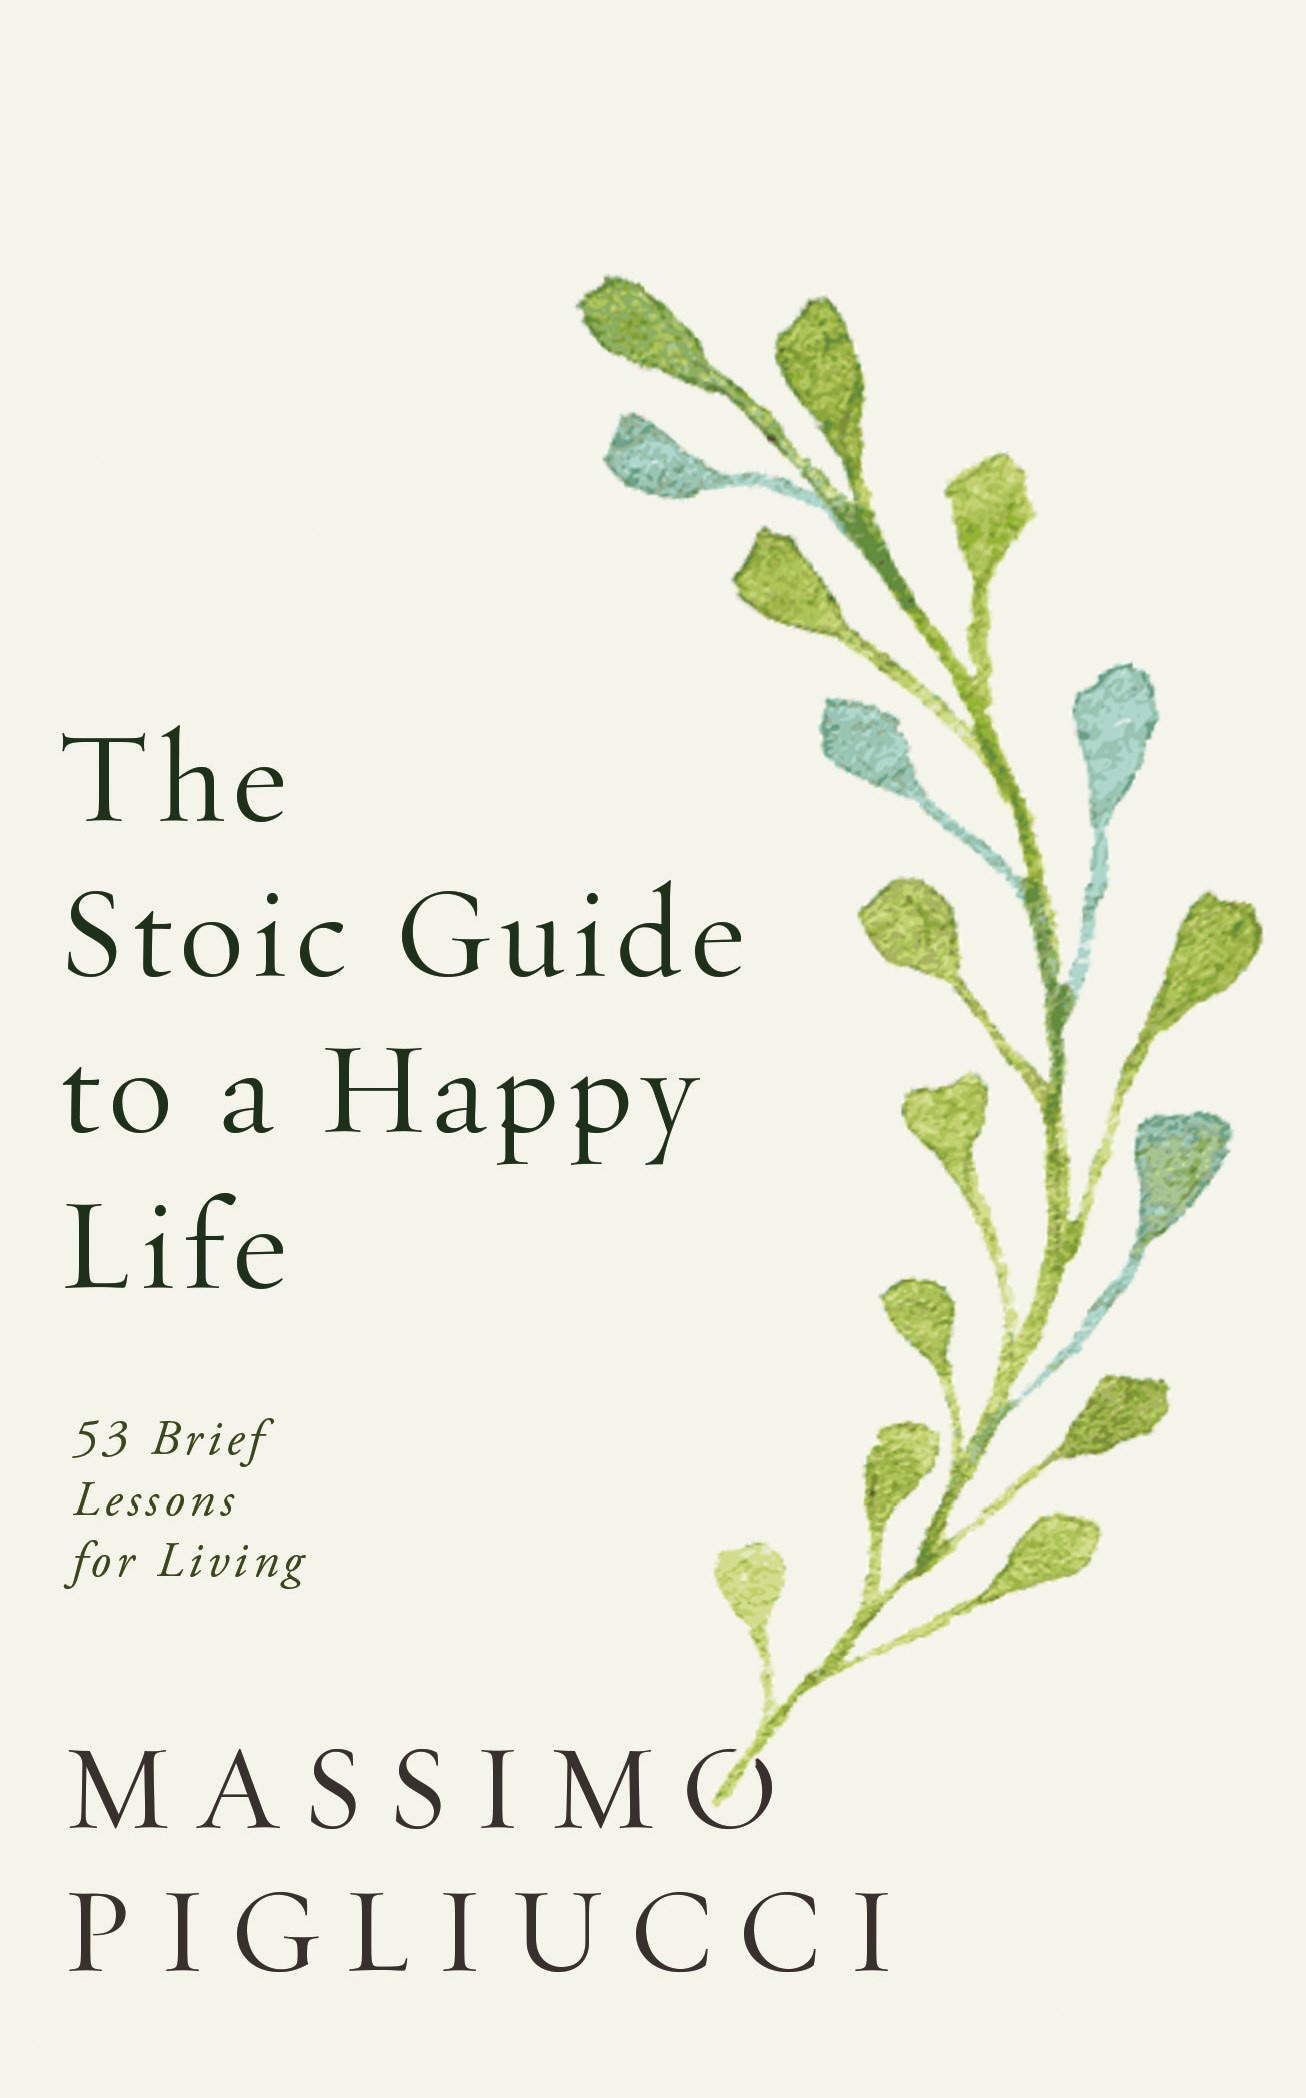 Book “The Stoic Guide to a Happy Life” by Massimo Pigliucci — September 17, 2020